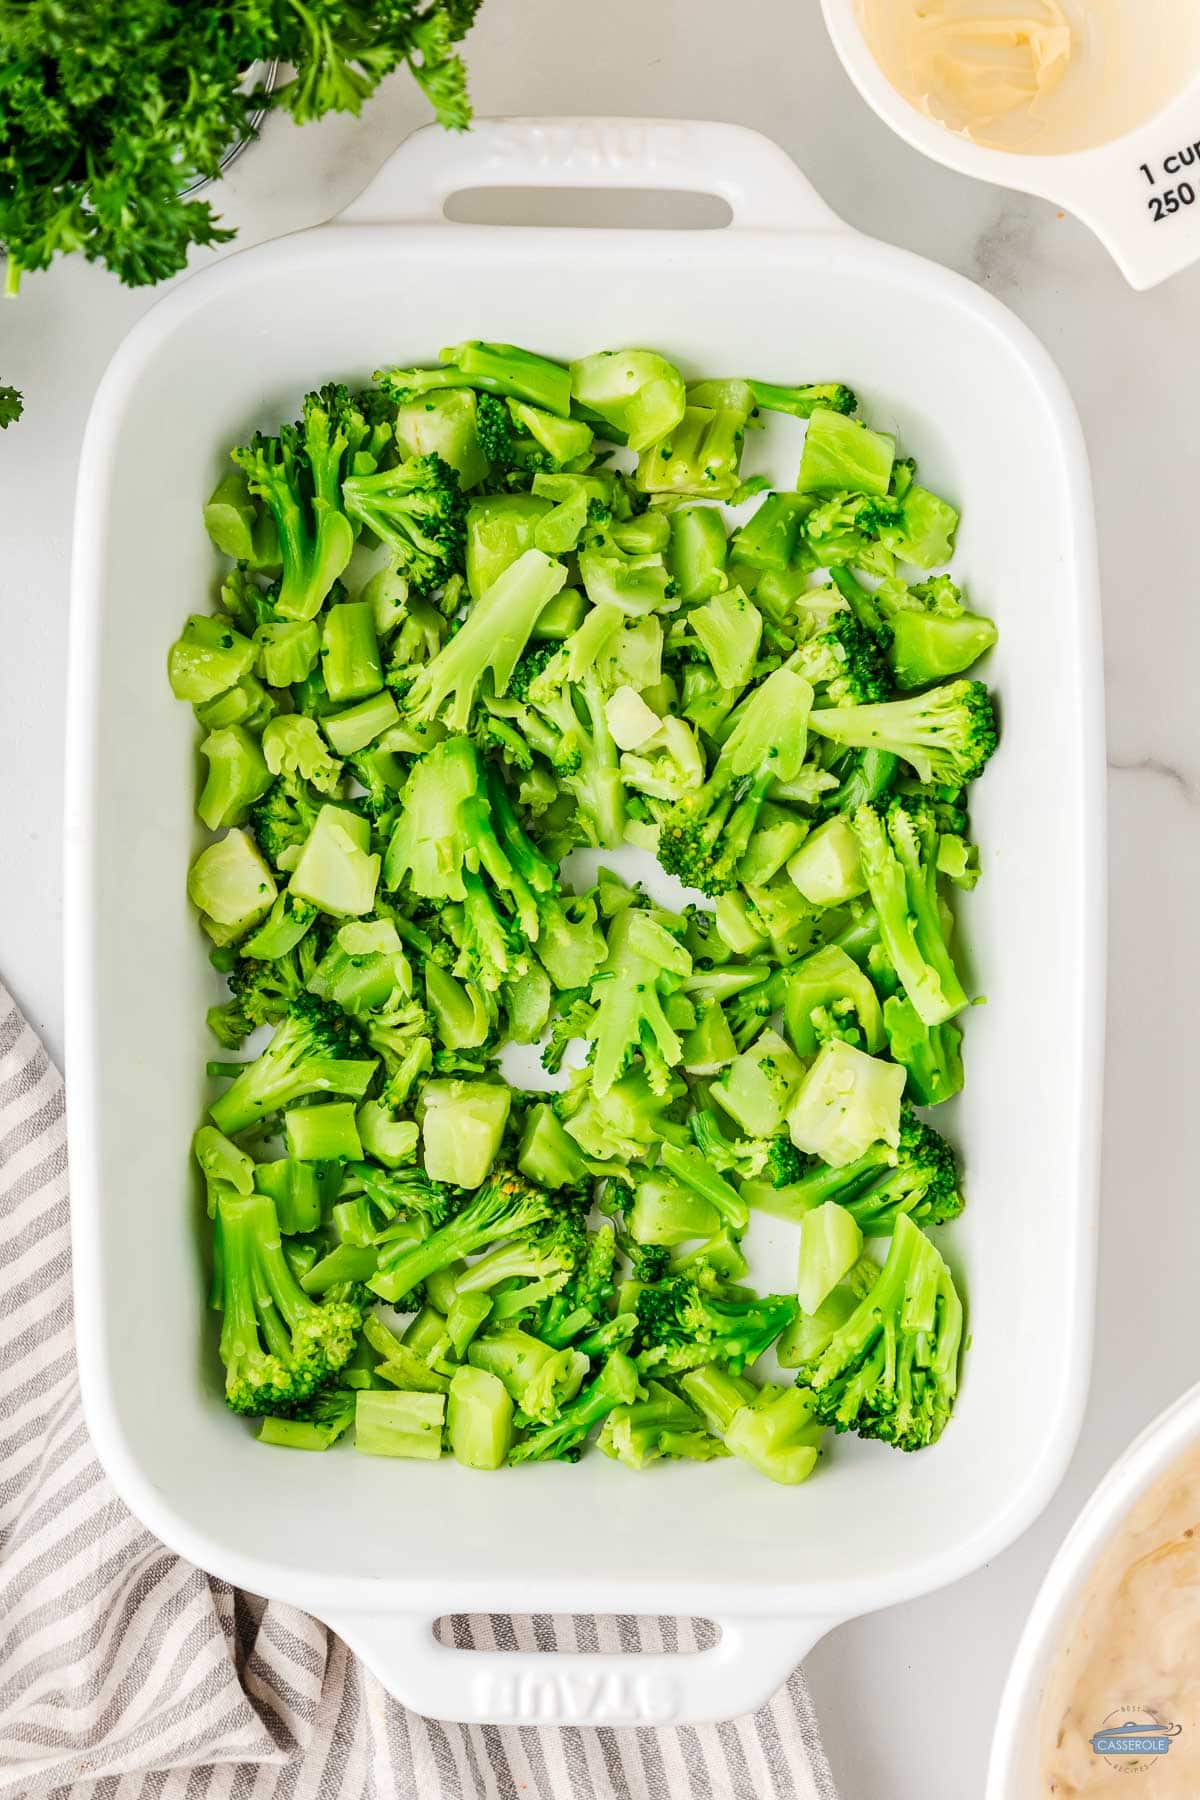 mix half-cooked broccoli in the bottom of casserole dish